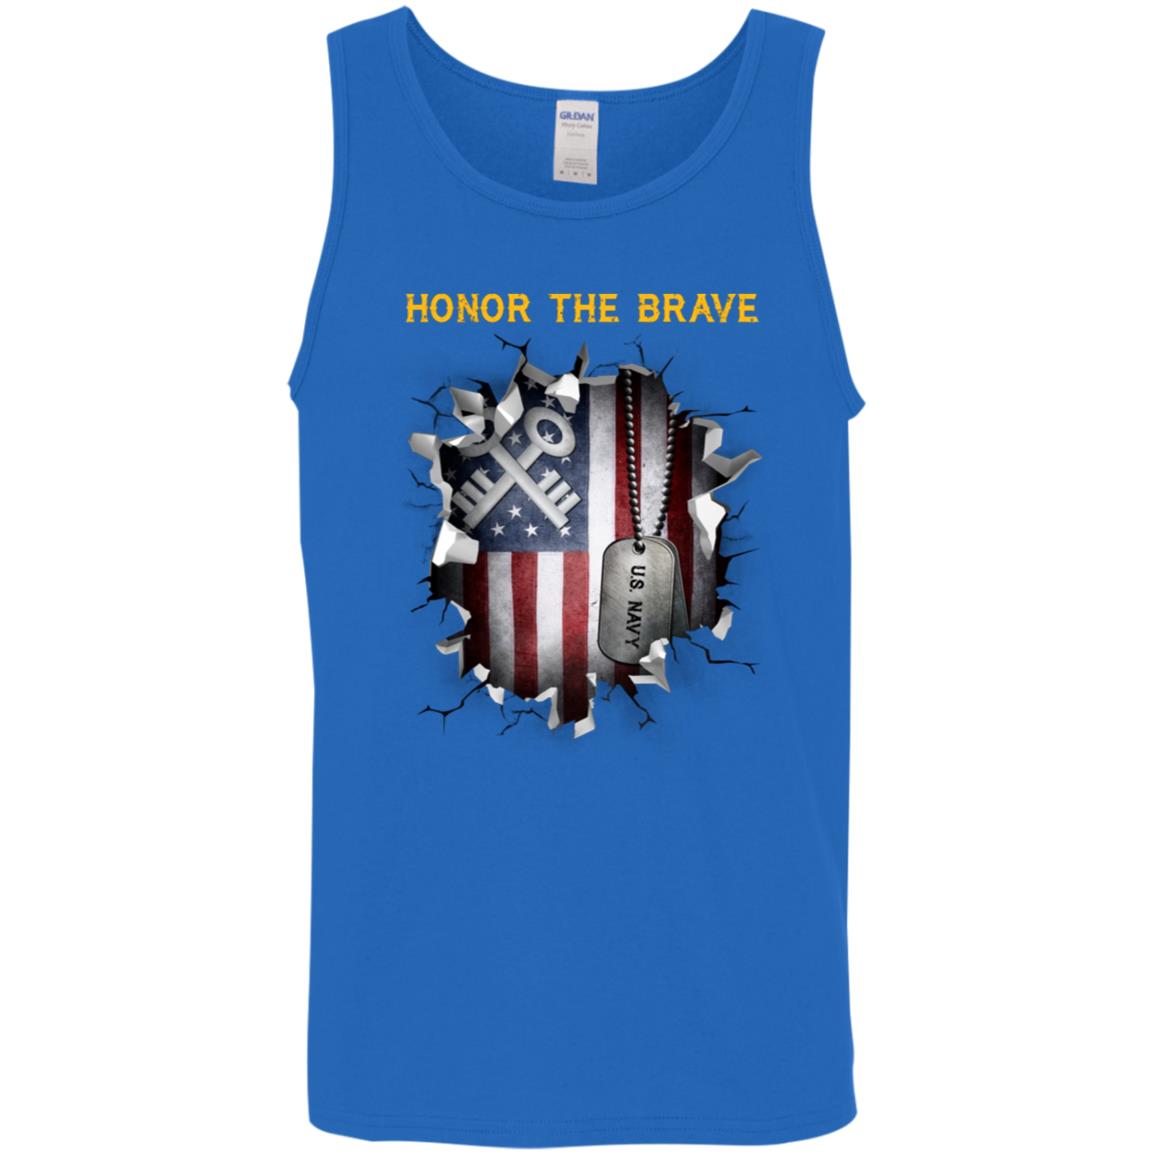 Navy Storekeeper Navy SK - Honor The Brave Front Shirt